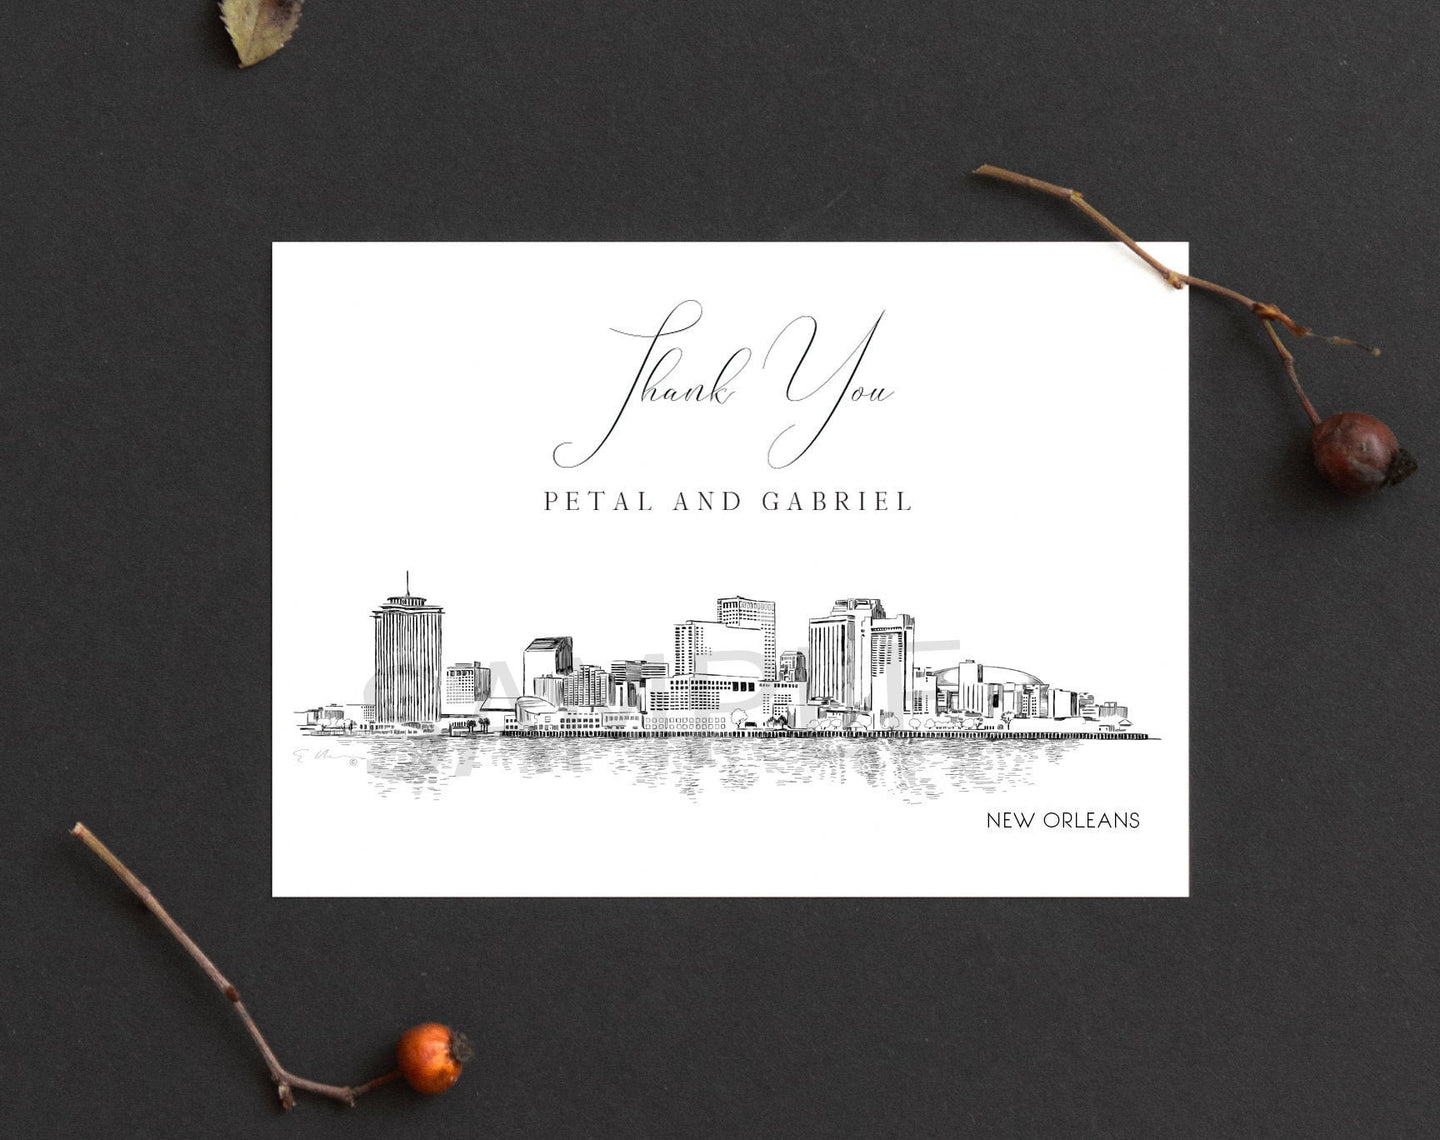 New Orleans Skyline Thank You Cards, Personal Note Cards, Bridal Shower, Real Estate Agent, Corporate Thank you Cards (set of 25 cards)